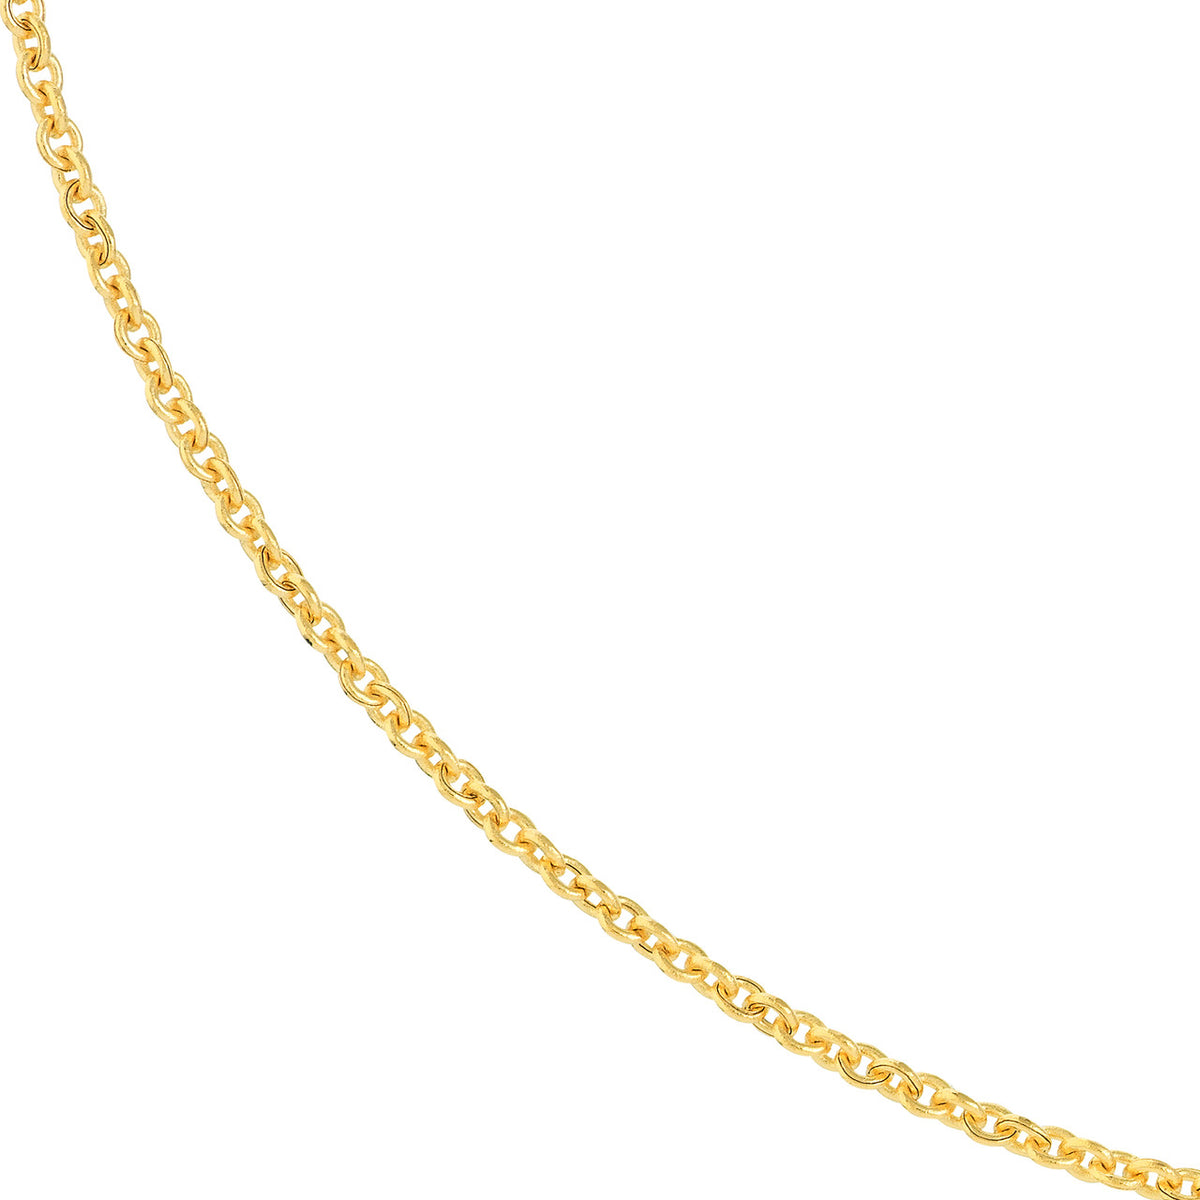 14K Yellow Gold or White Gold 1.45mm Light Cable Chain Necklace with Lobster Lock